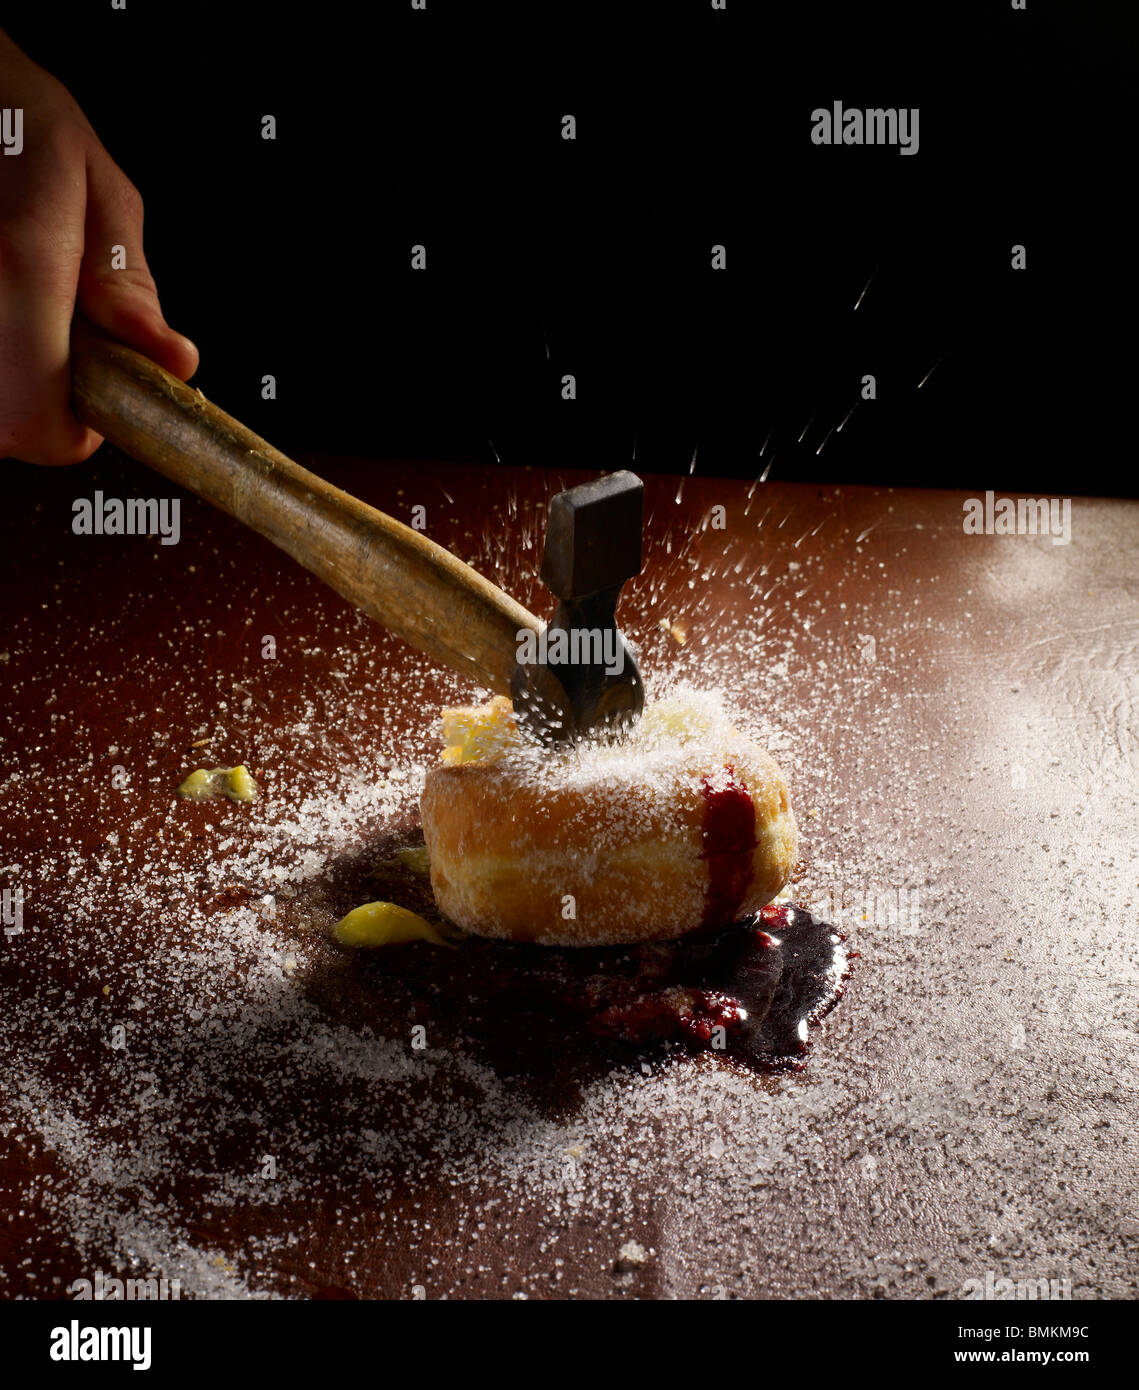 Doughnut being smashed by a hammer Stock Photo